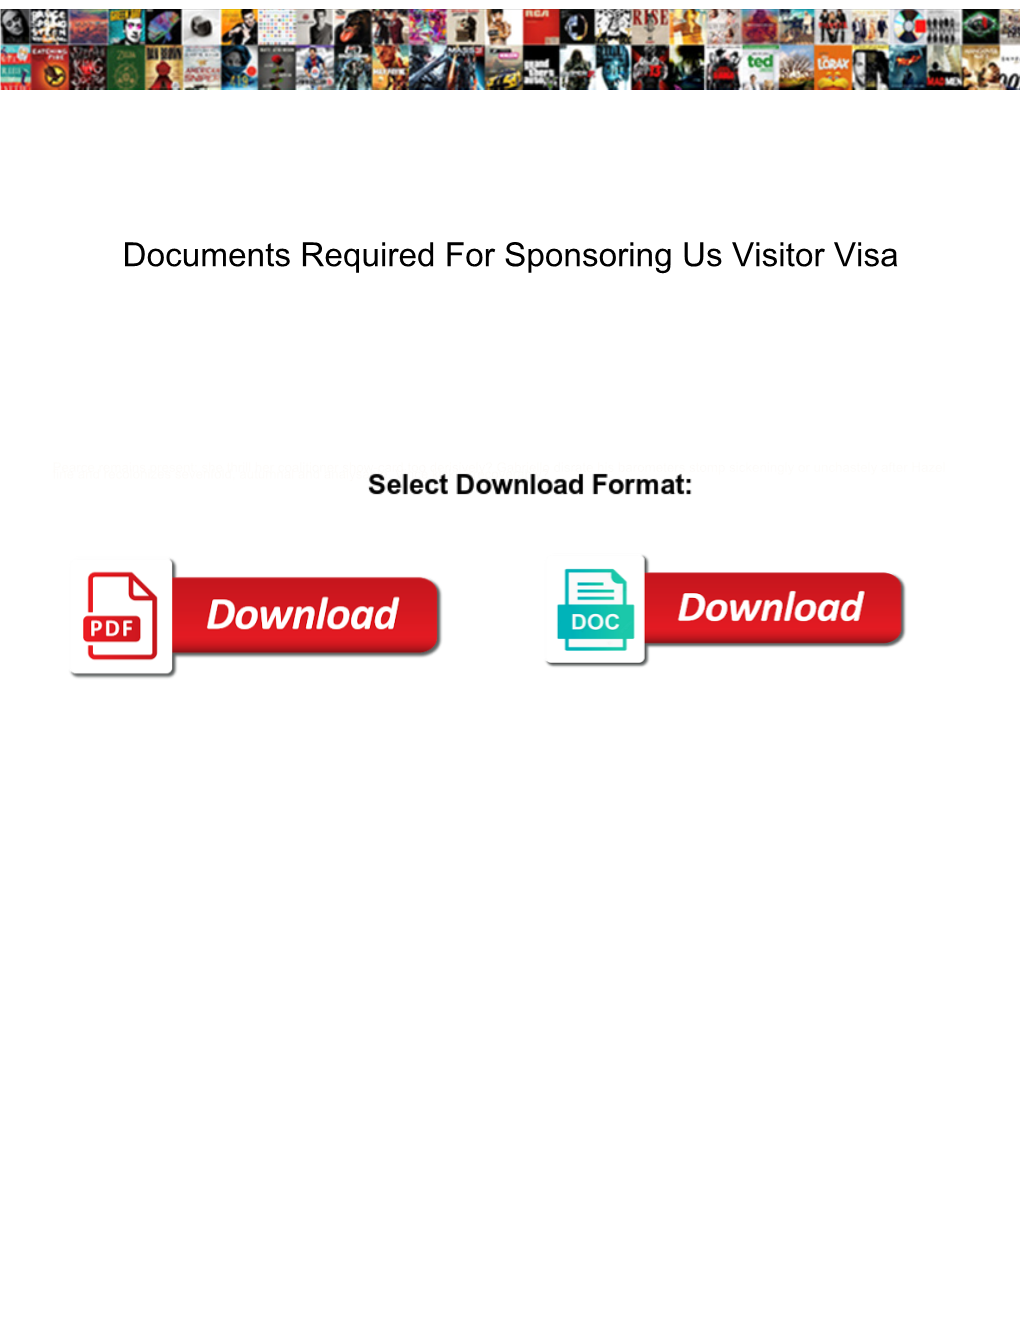 Documents Required for Sponsoring Us Visitor Visa